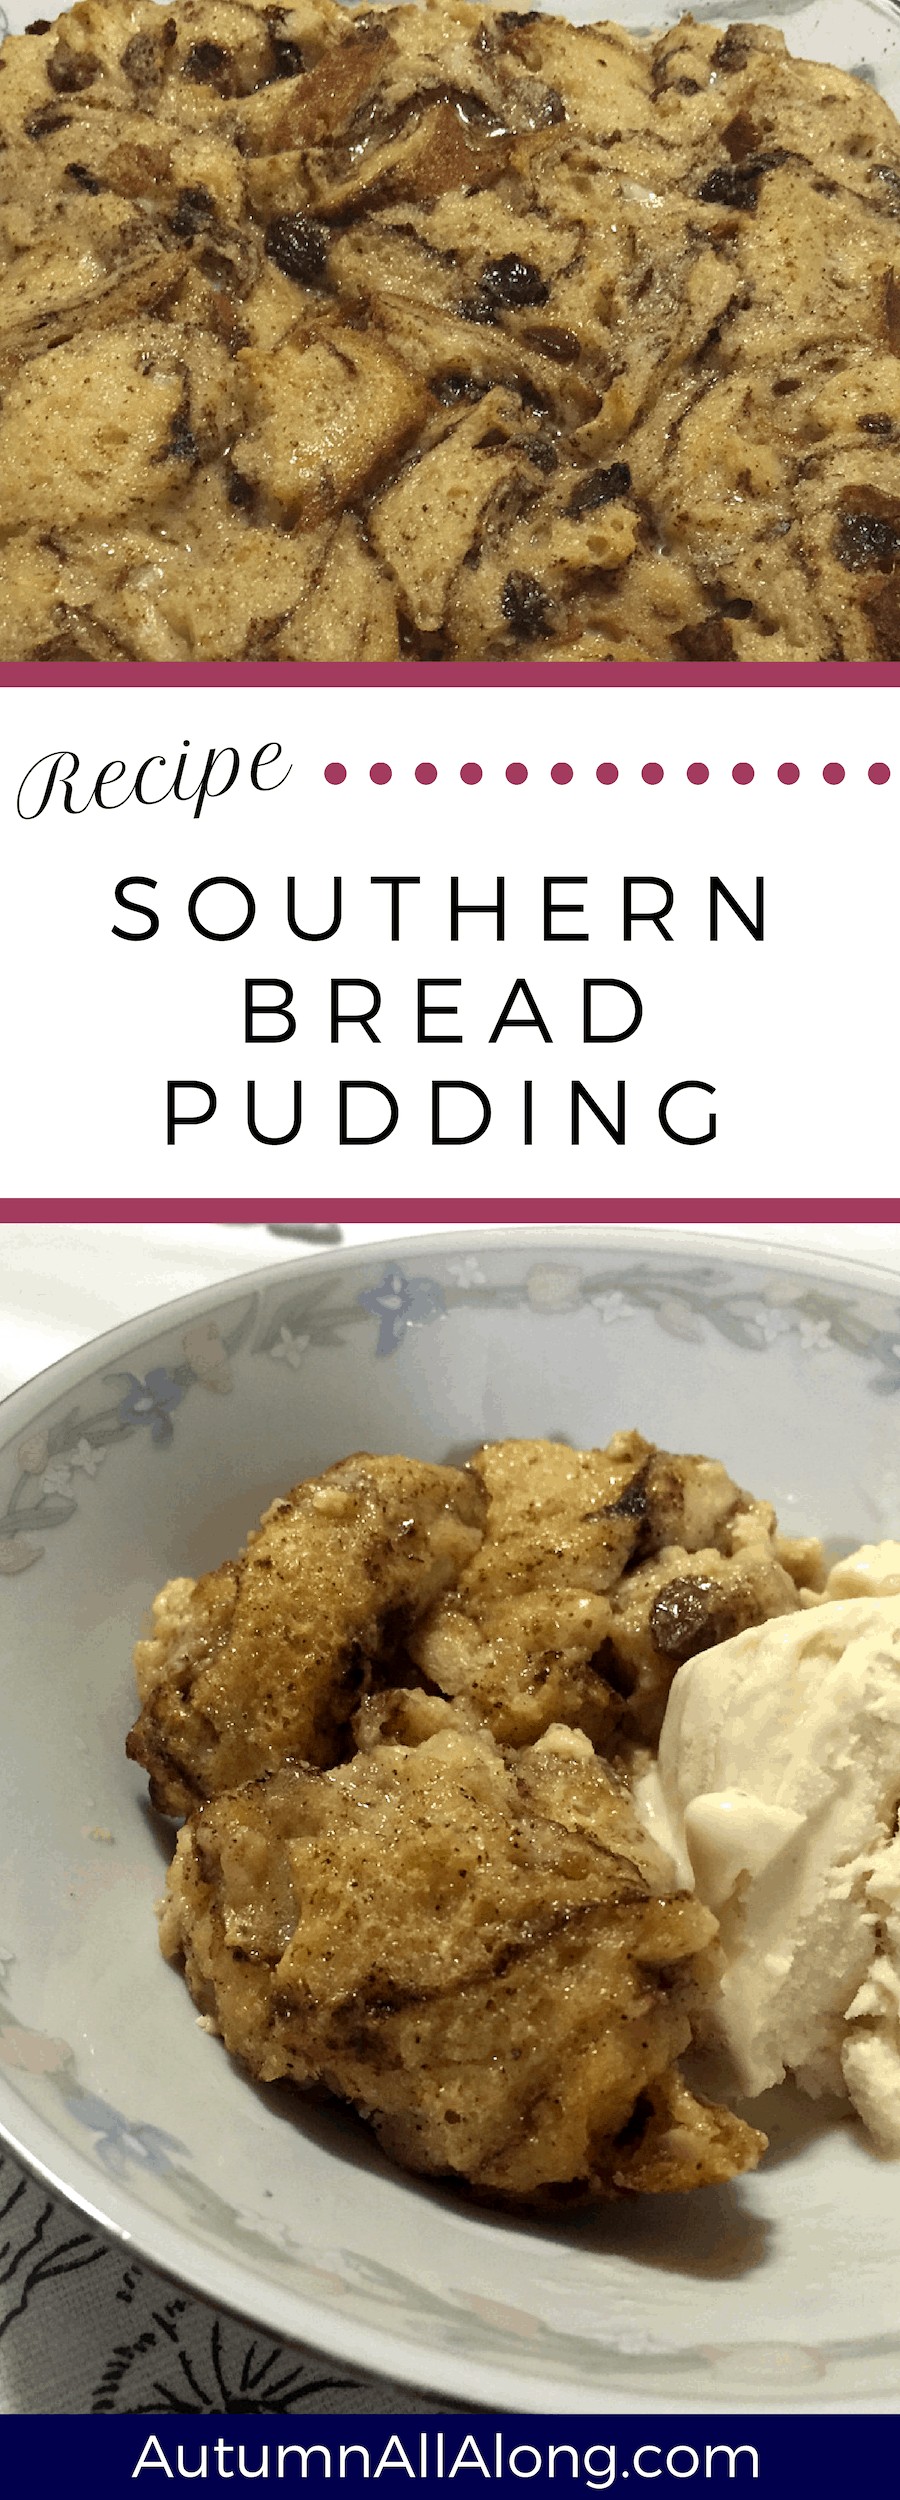 Southern bread pudding recipe: This is a southerner approved easy to make bread pudding recipe. Tastes even yummier the next day! | via Autumn All Along